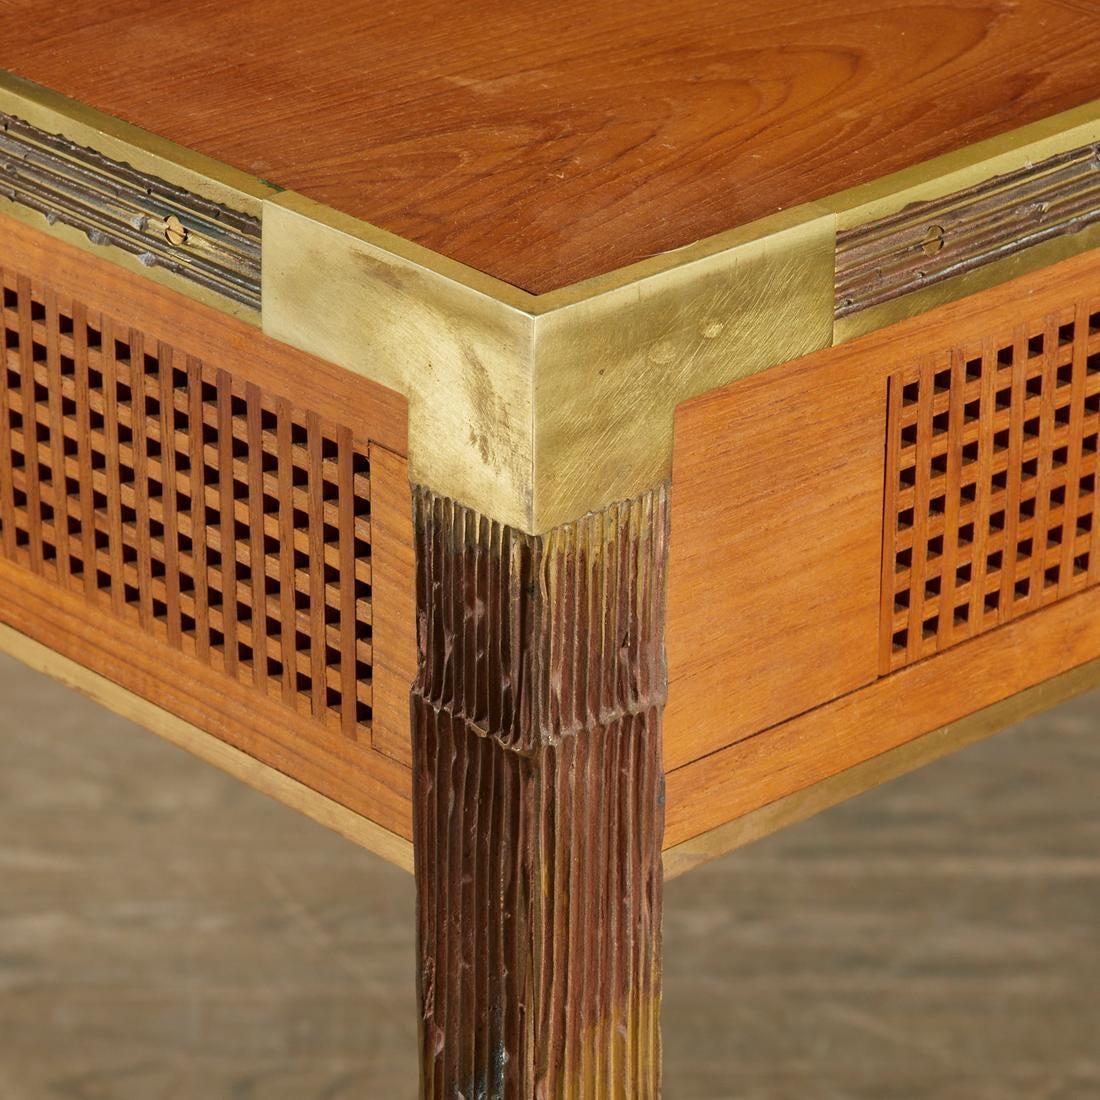 Louis Cane, patinated bronze and oak bureau plat, c. 2001, France. The walnut parquet top over three frieze drawers, cast bronze frame and pulls, from the 